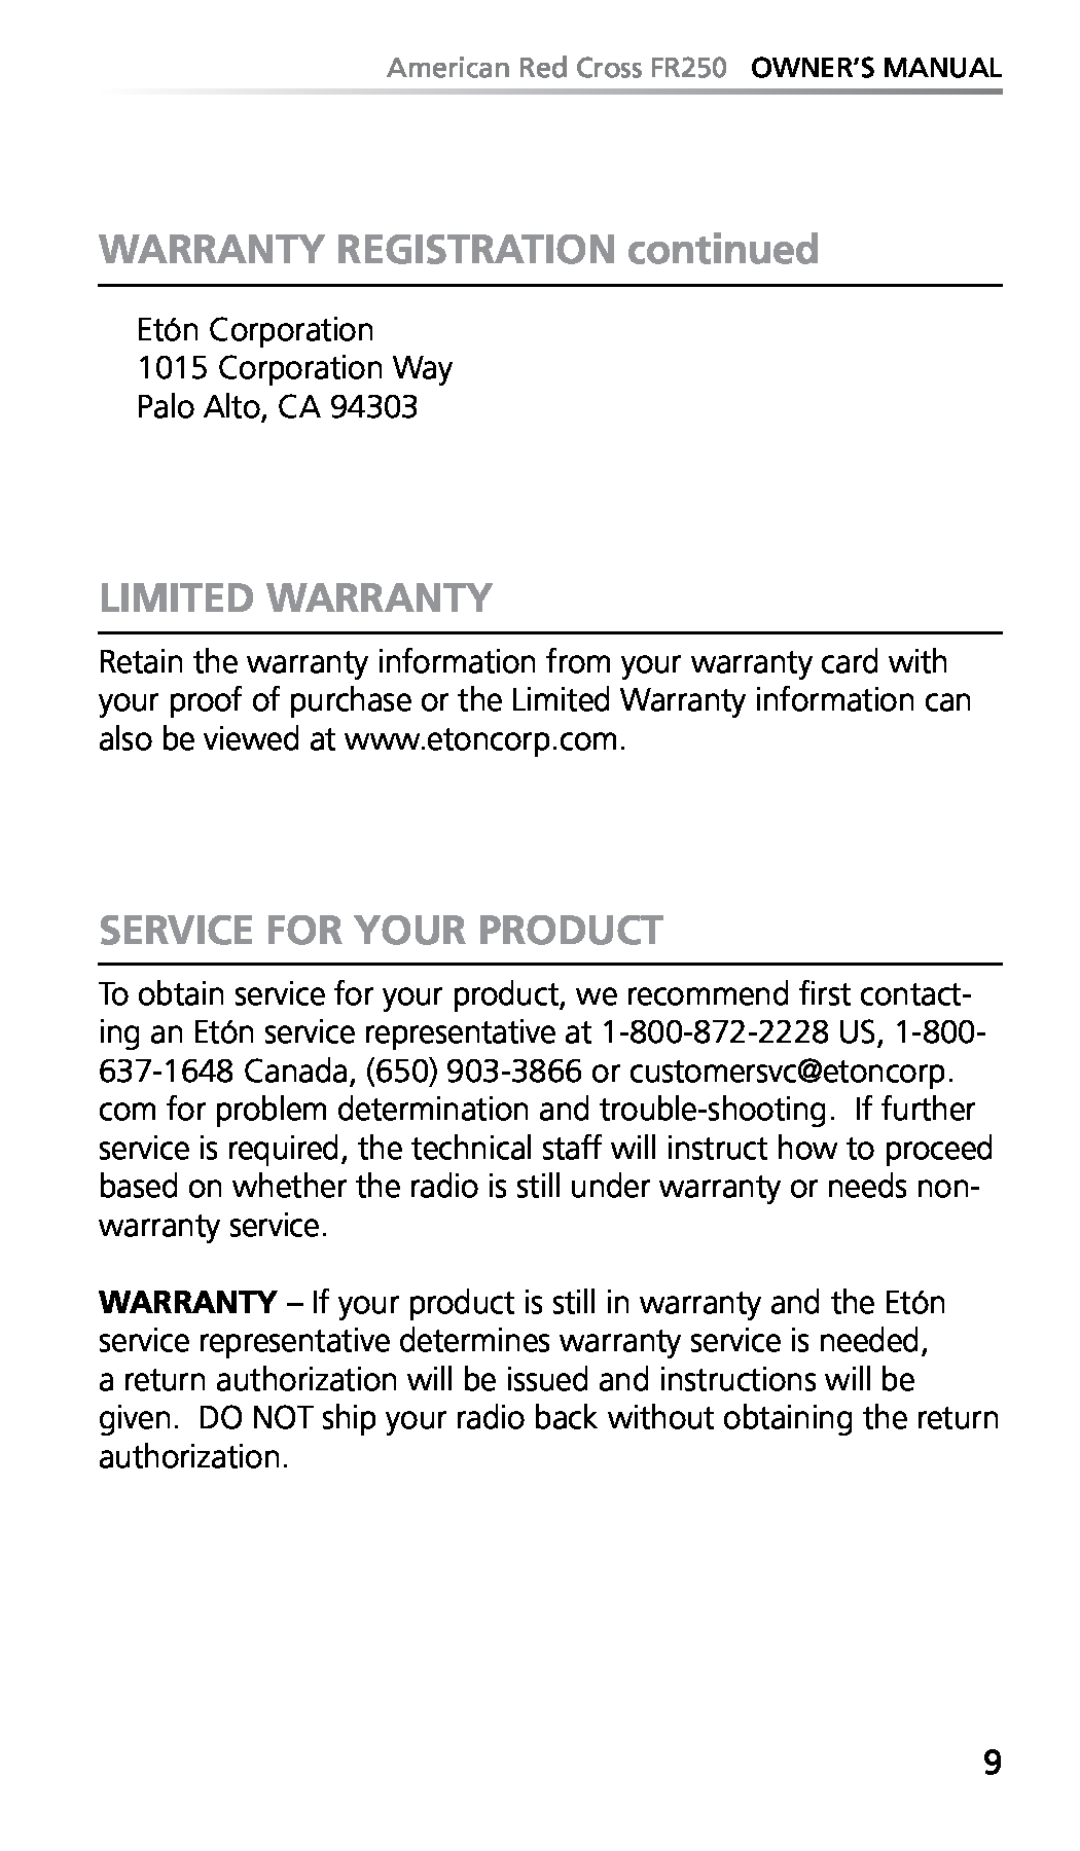 Eton FR250 owner manual WARRANTY REGISTRATION continued, Limited Warranty, Service For Your Product 